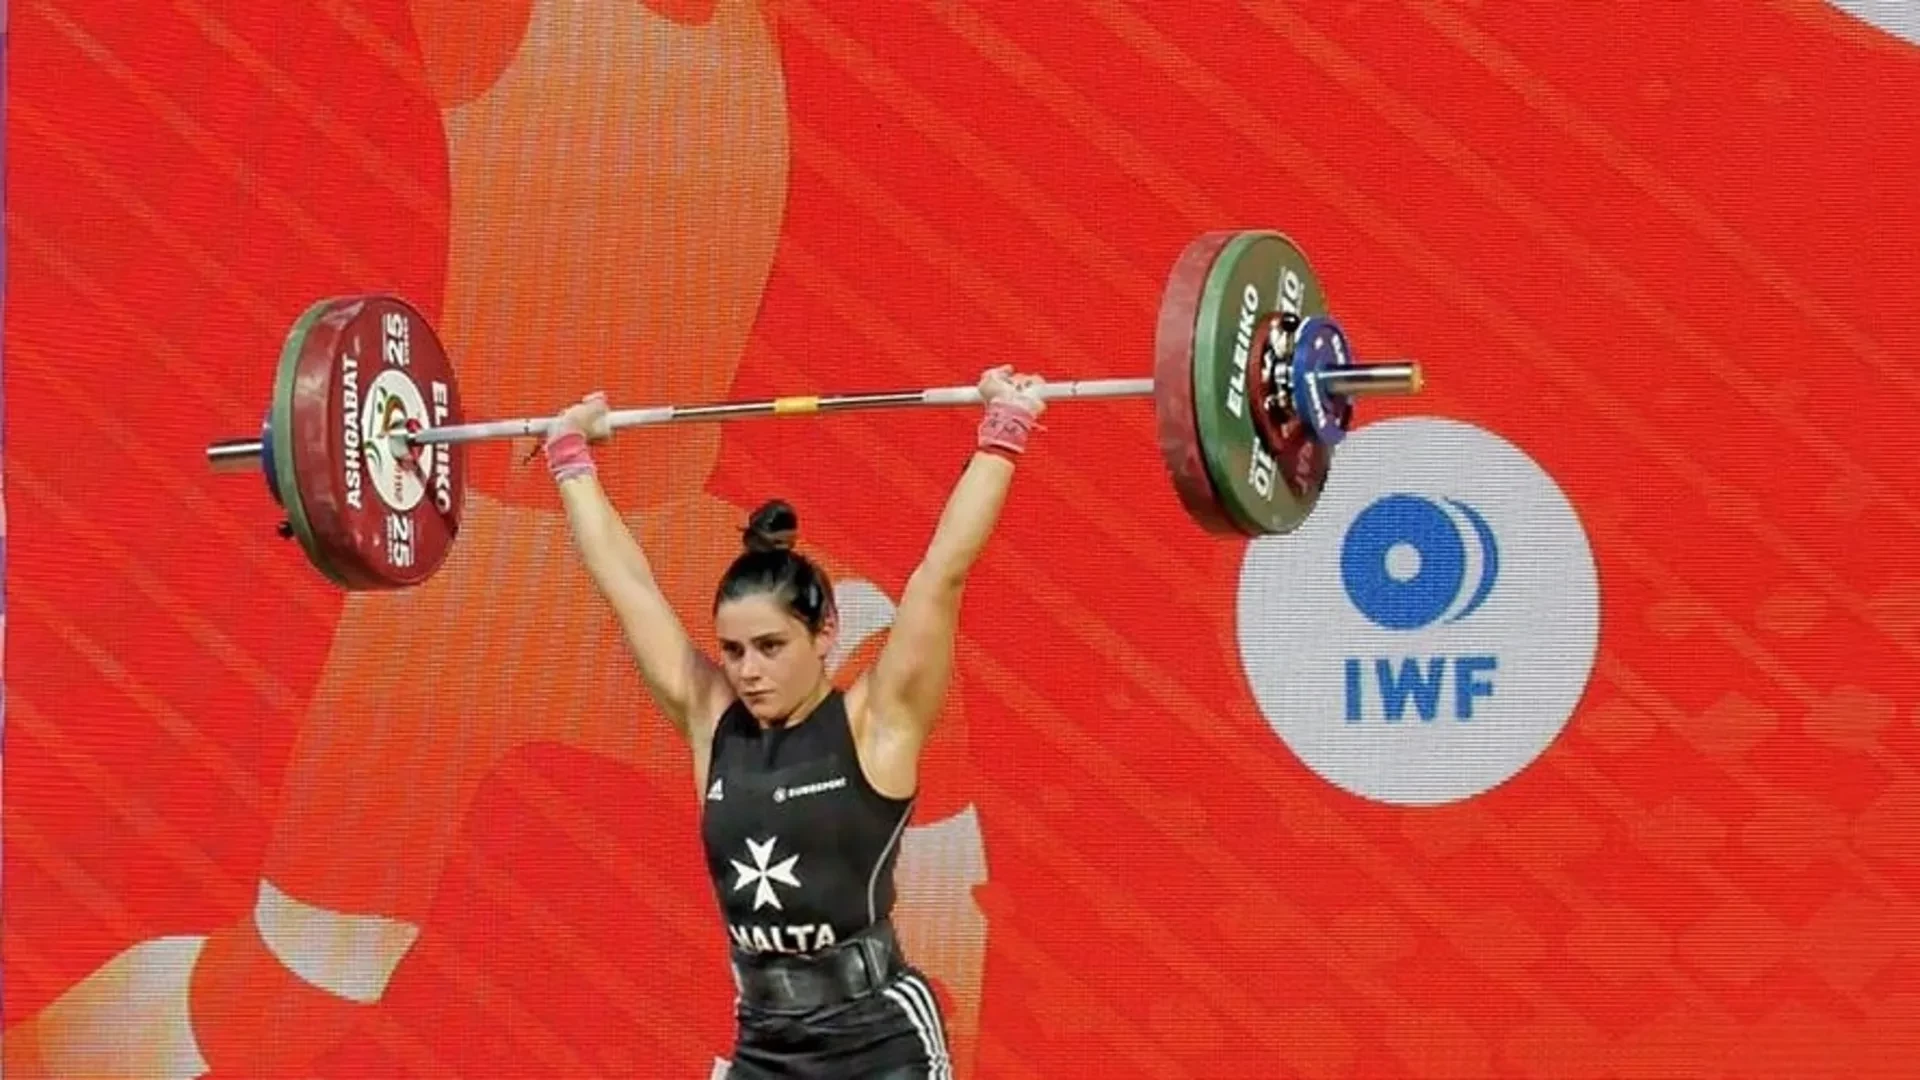 Malta's Stevens hopes to become nation's first female Olympic weightlifter